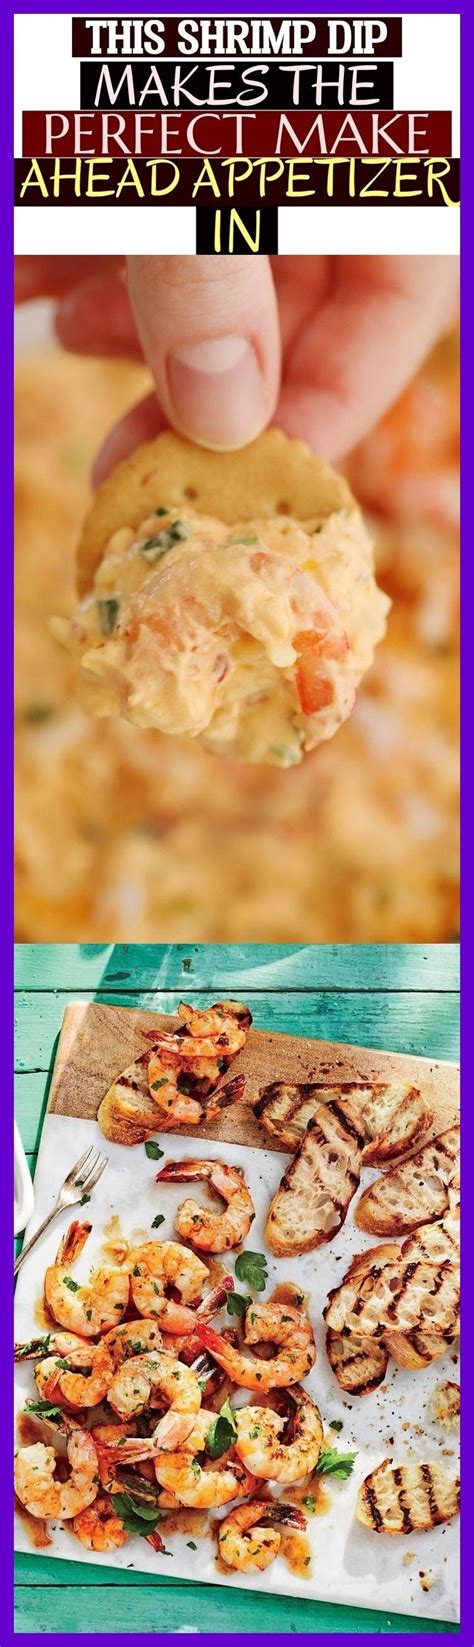 Gradually stir in the rest of the flour, until dough is smooth and workable. This Shrimp Dip Makes The Perfect Make Ahead Appetizer In ~ #spendwithpennies #s..., #ahead # ...